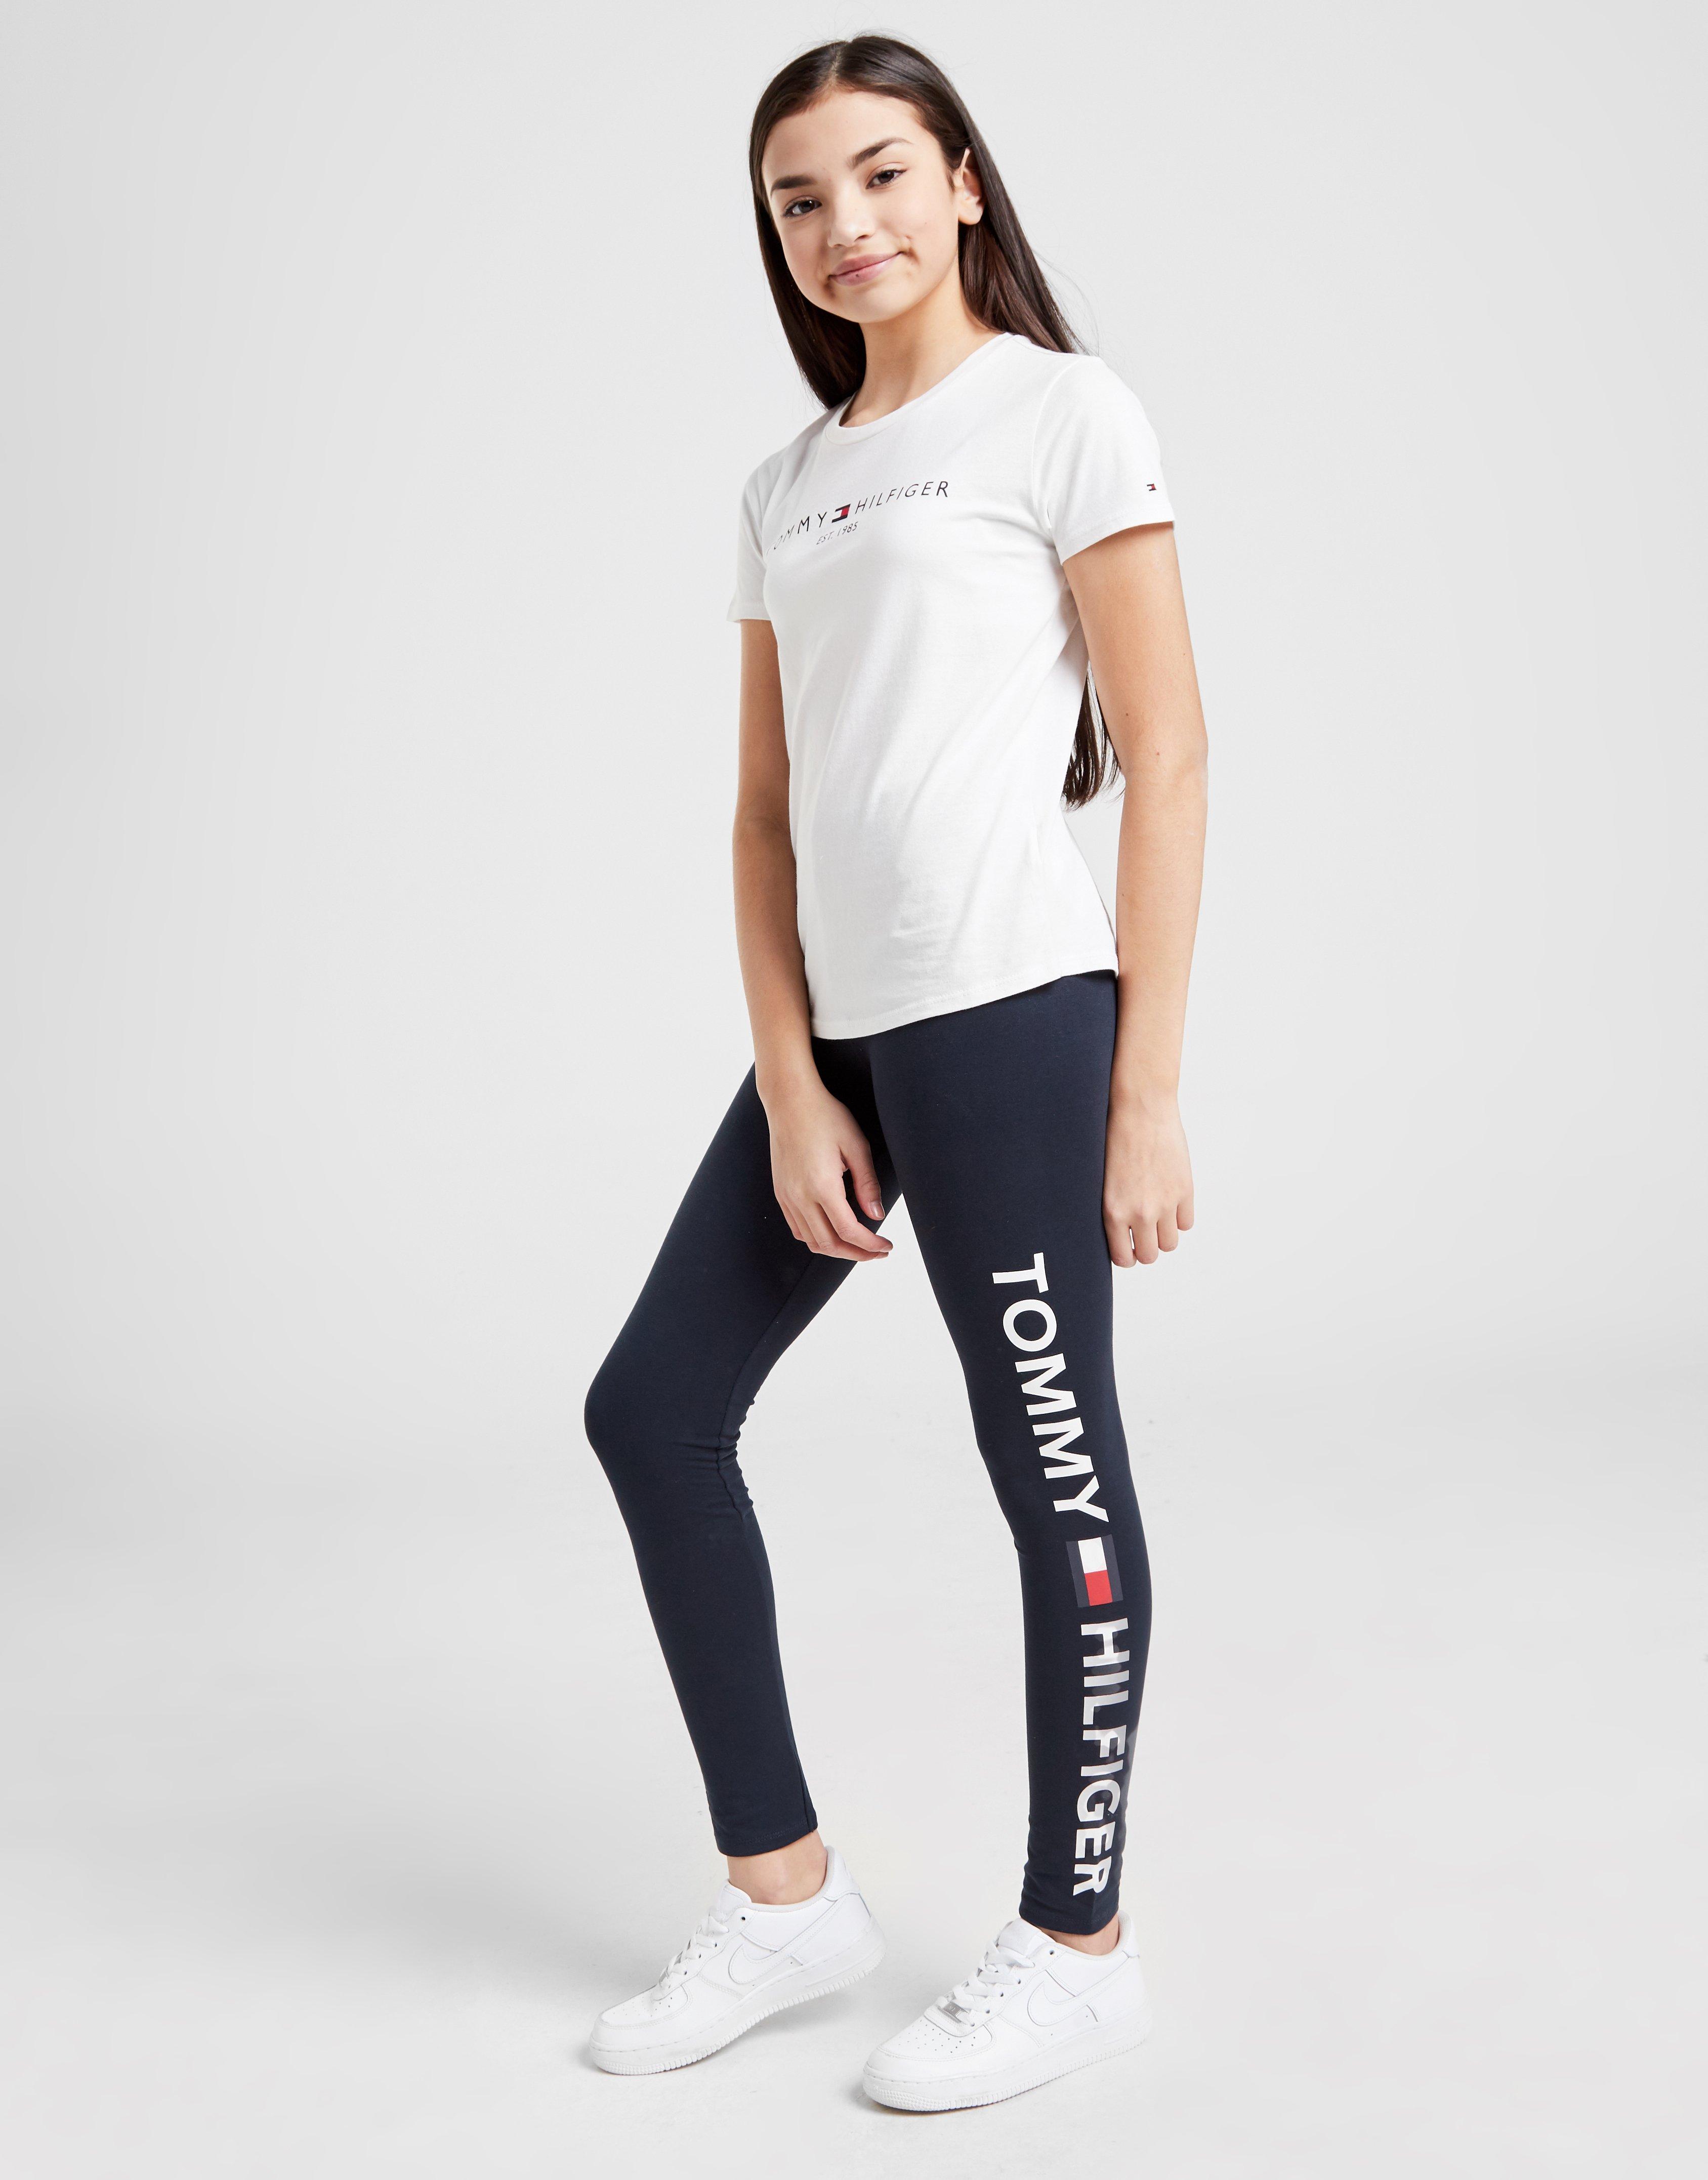 tommy hilfiger leggings and shirt